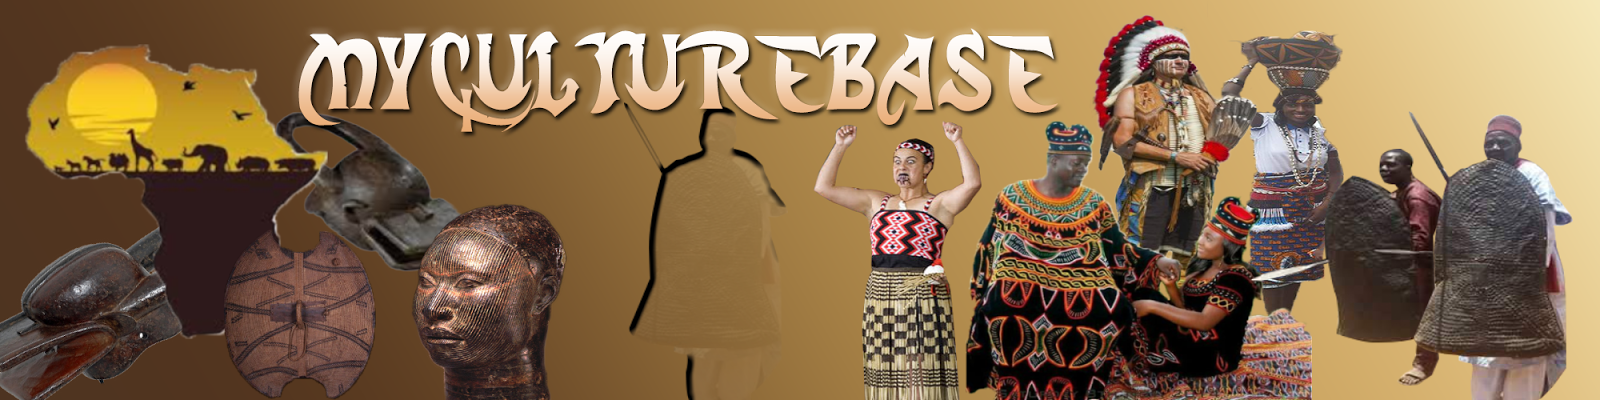                               welcome to myculturebase